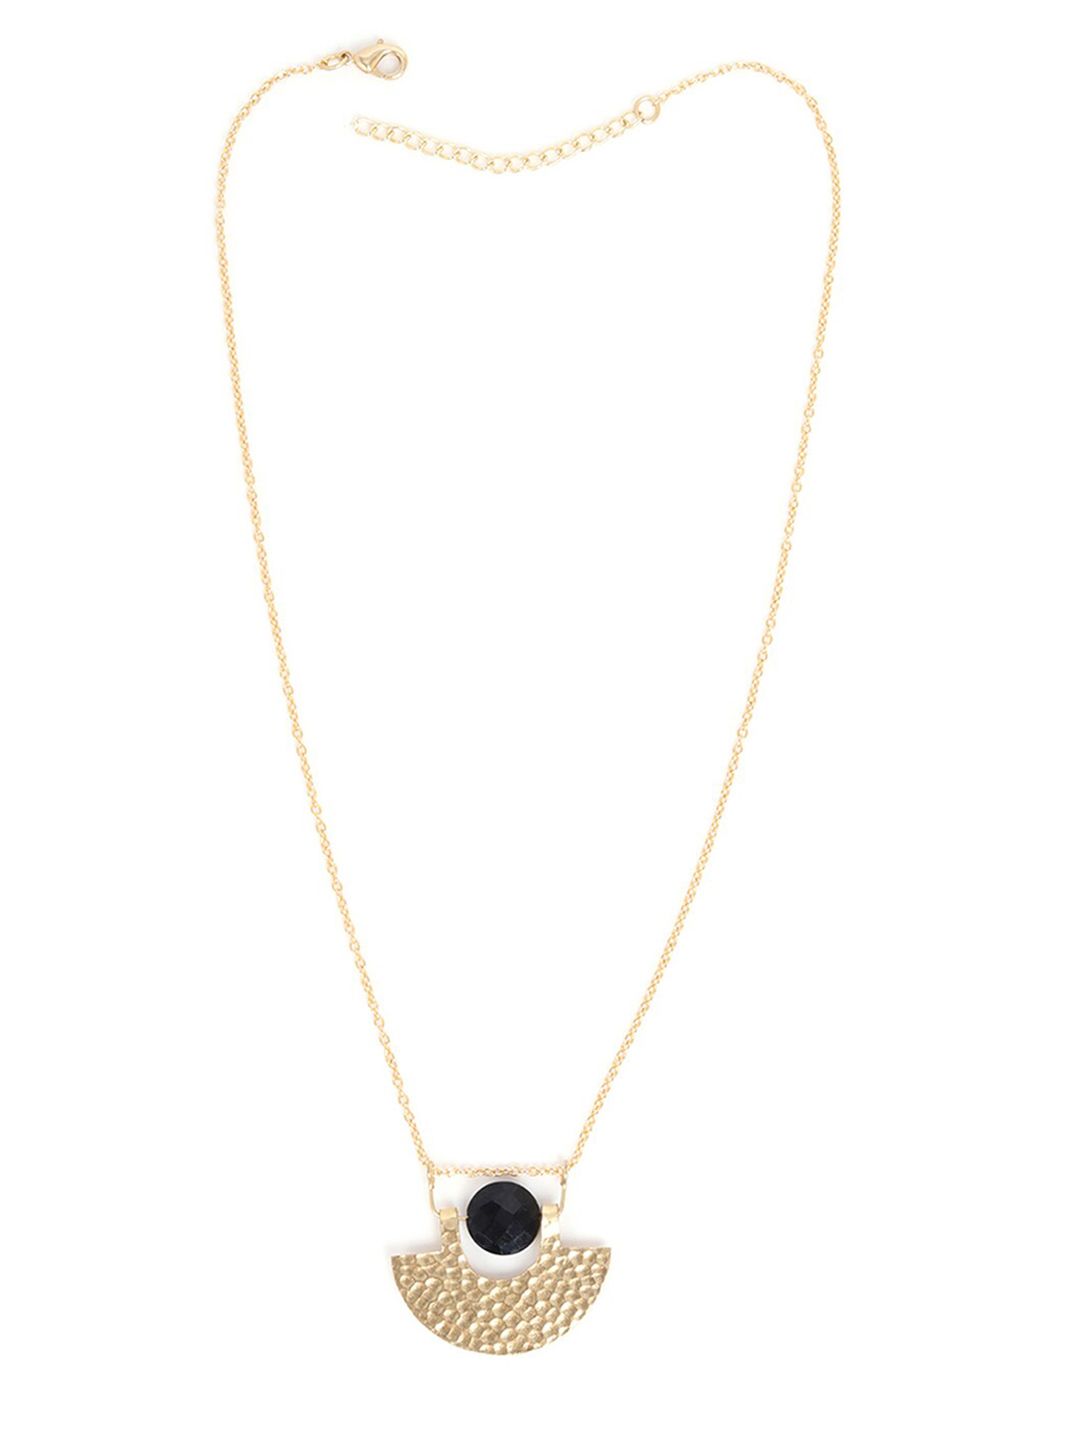 Mikoto by FableStreet Gold-Toned & Black Brass Gold-Plated Necklace Price in India